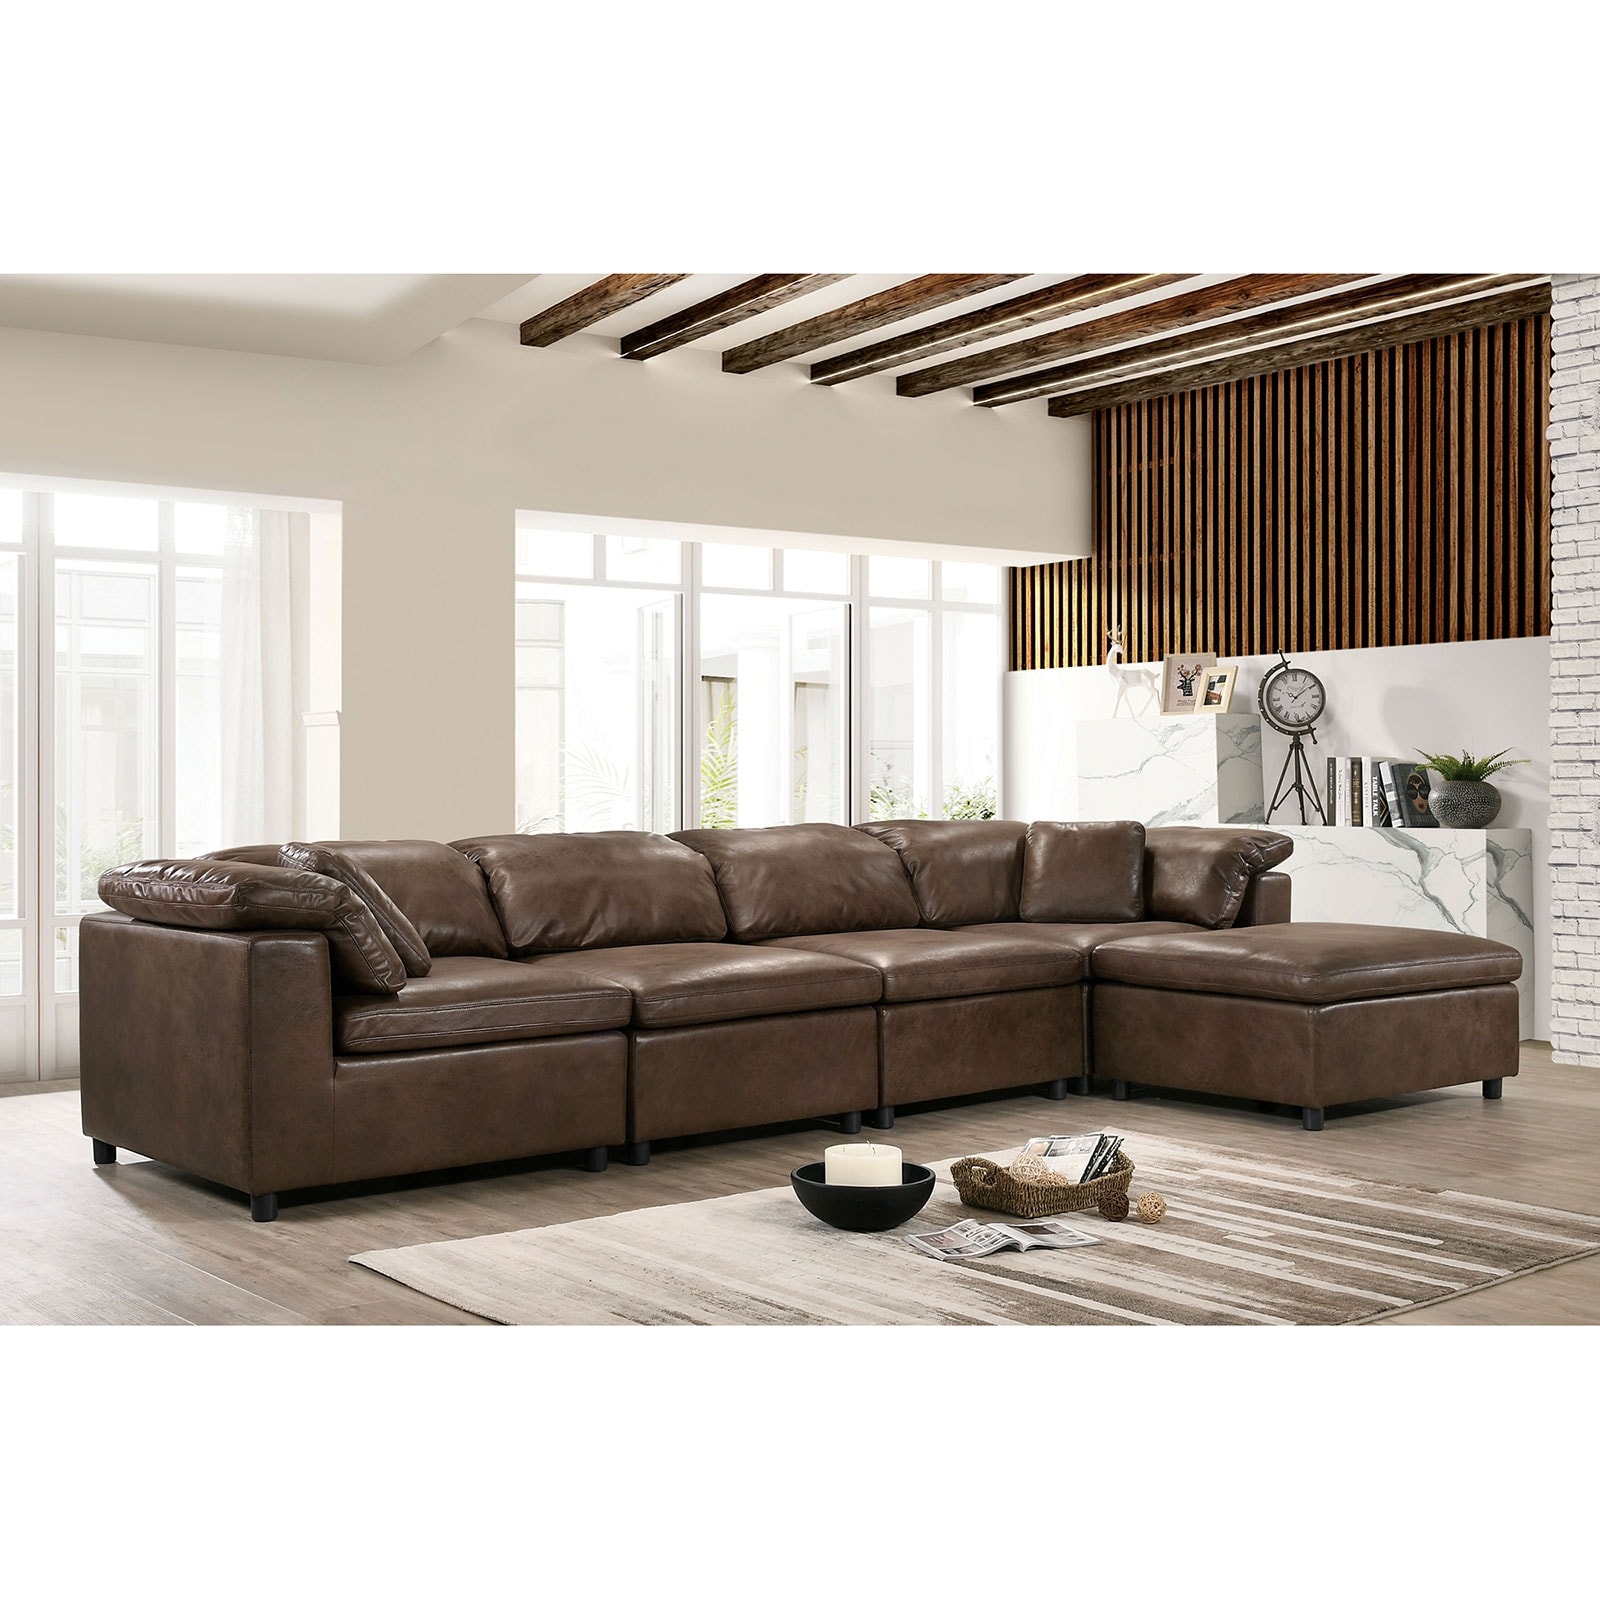 Simple Relax Large Vinyl Upholstered Sectional Sofa in Brown Finish